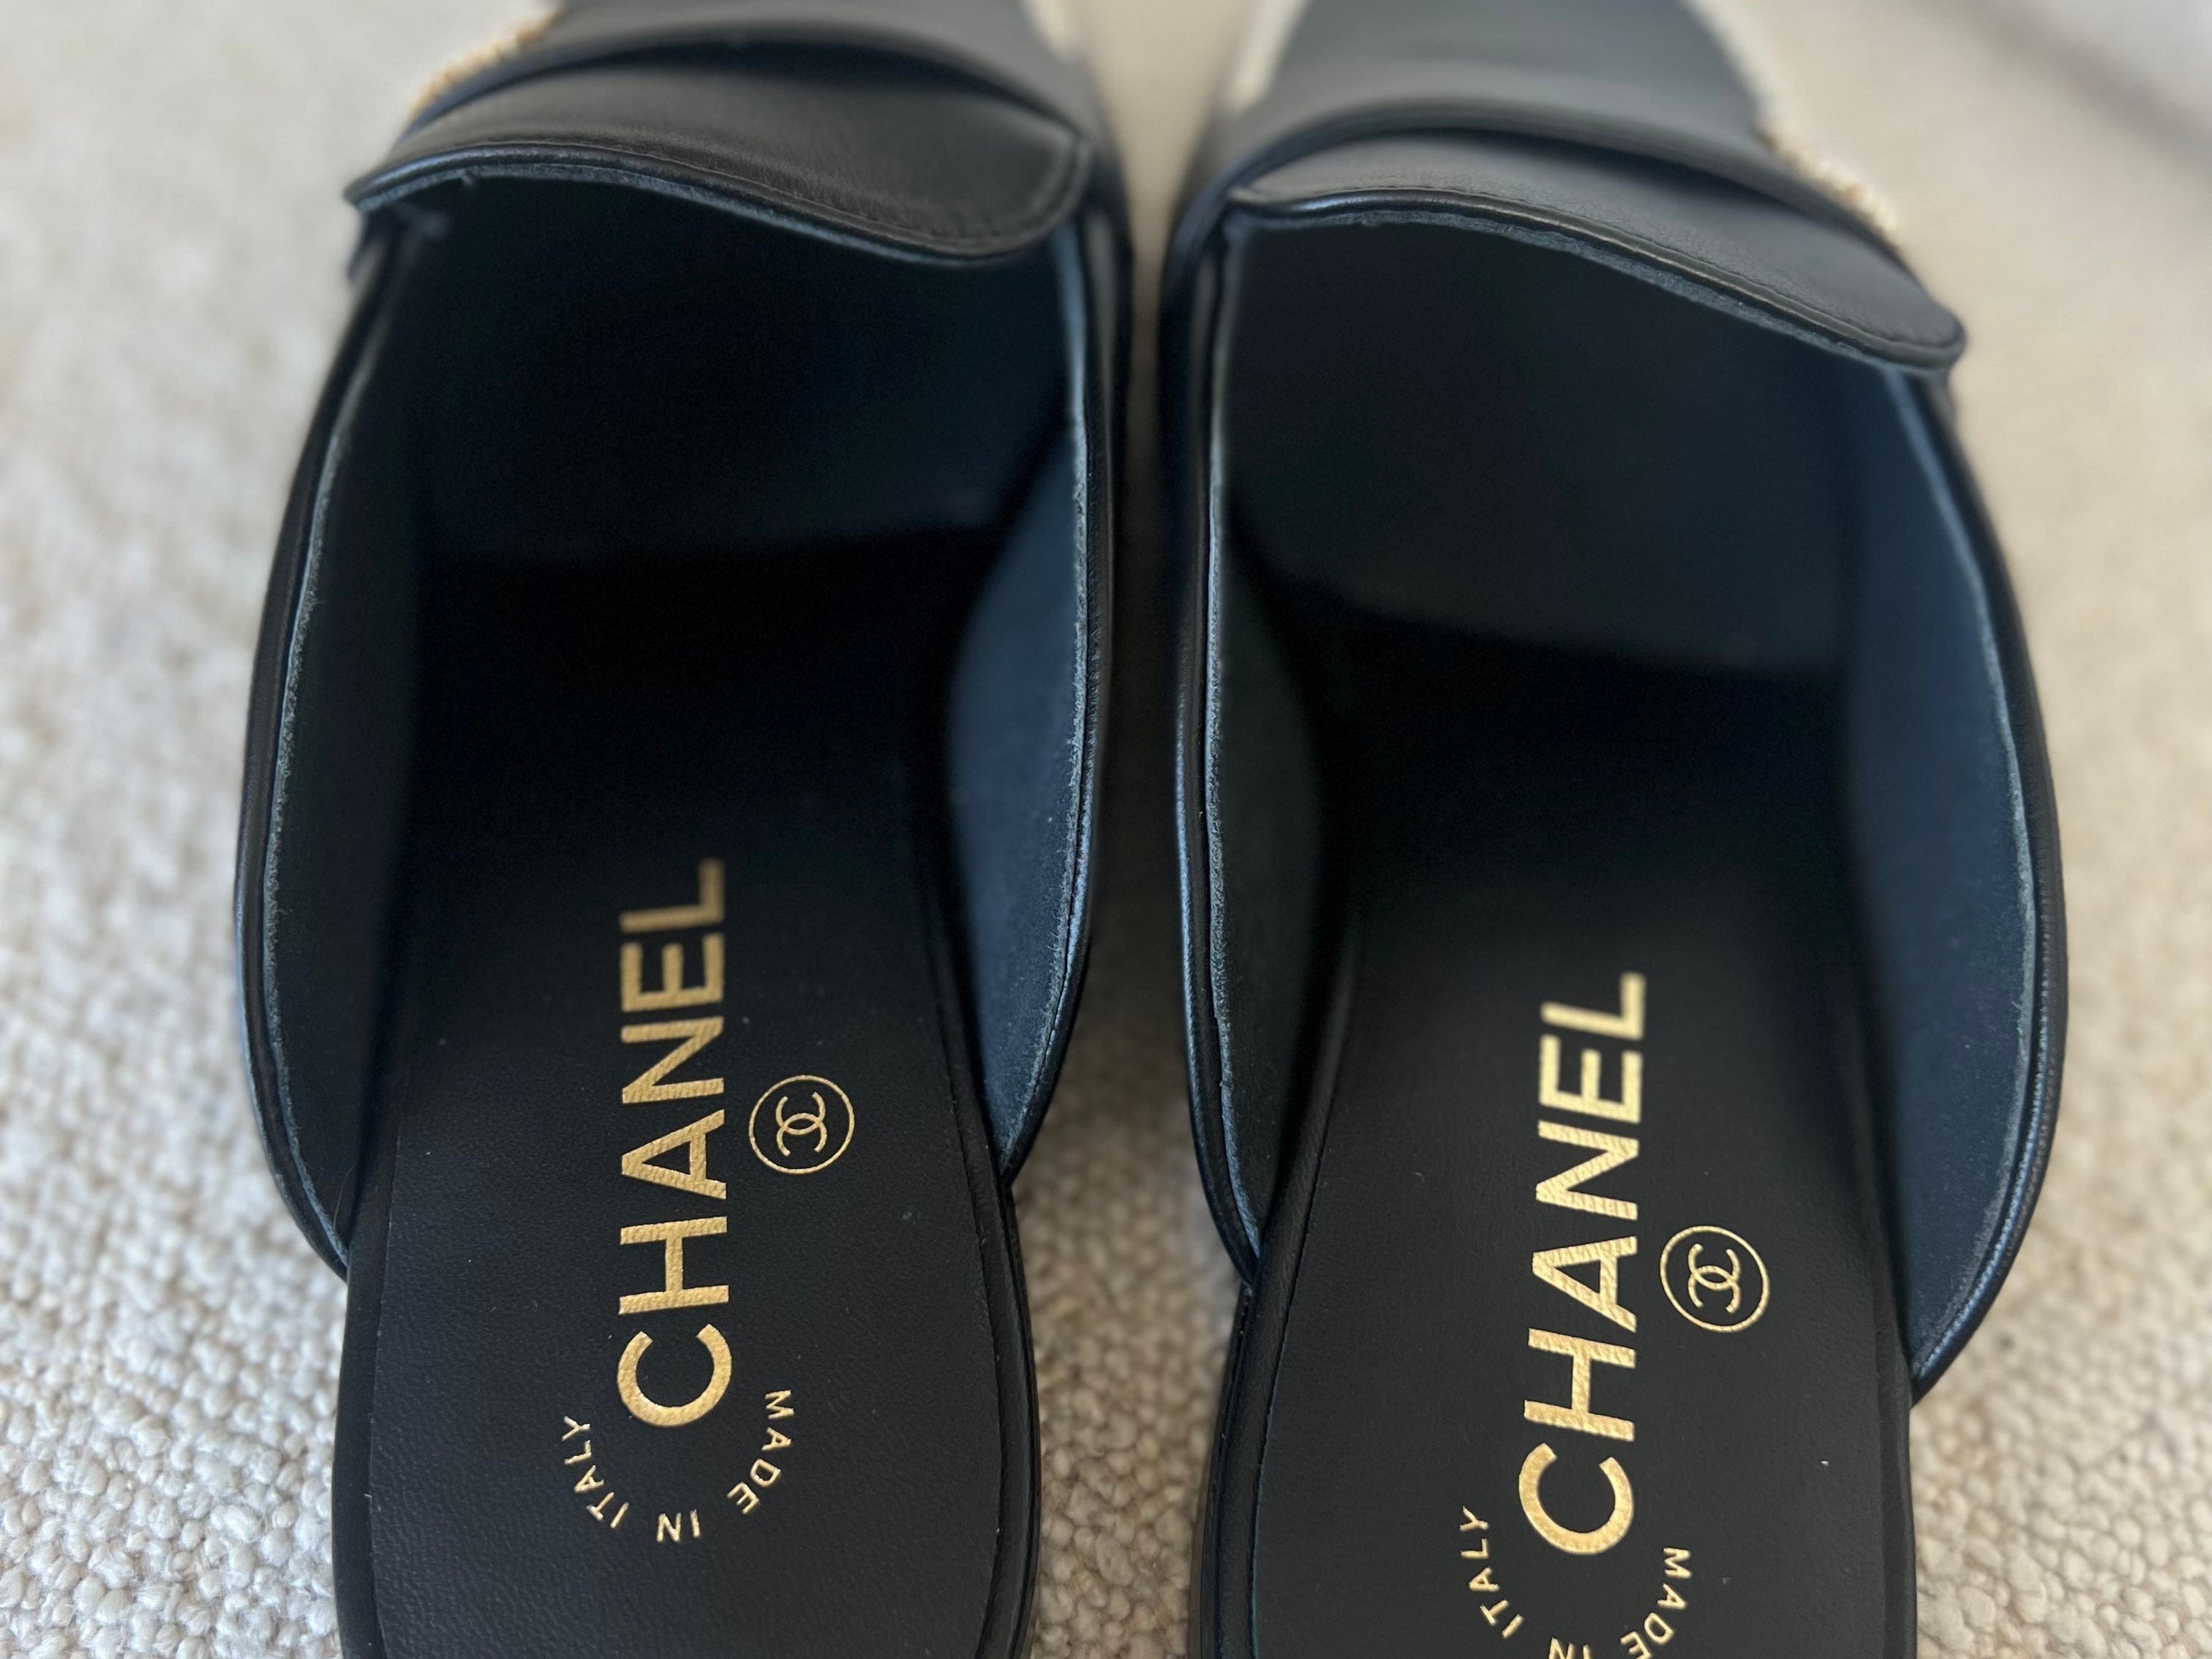 CHANEL Flats Chanel Black Leather CC Pearl Embellished Flat Loafers 40 - Redeluxe